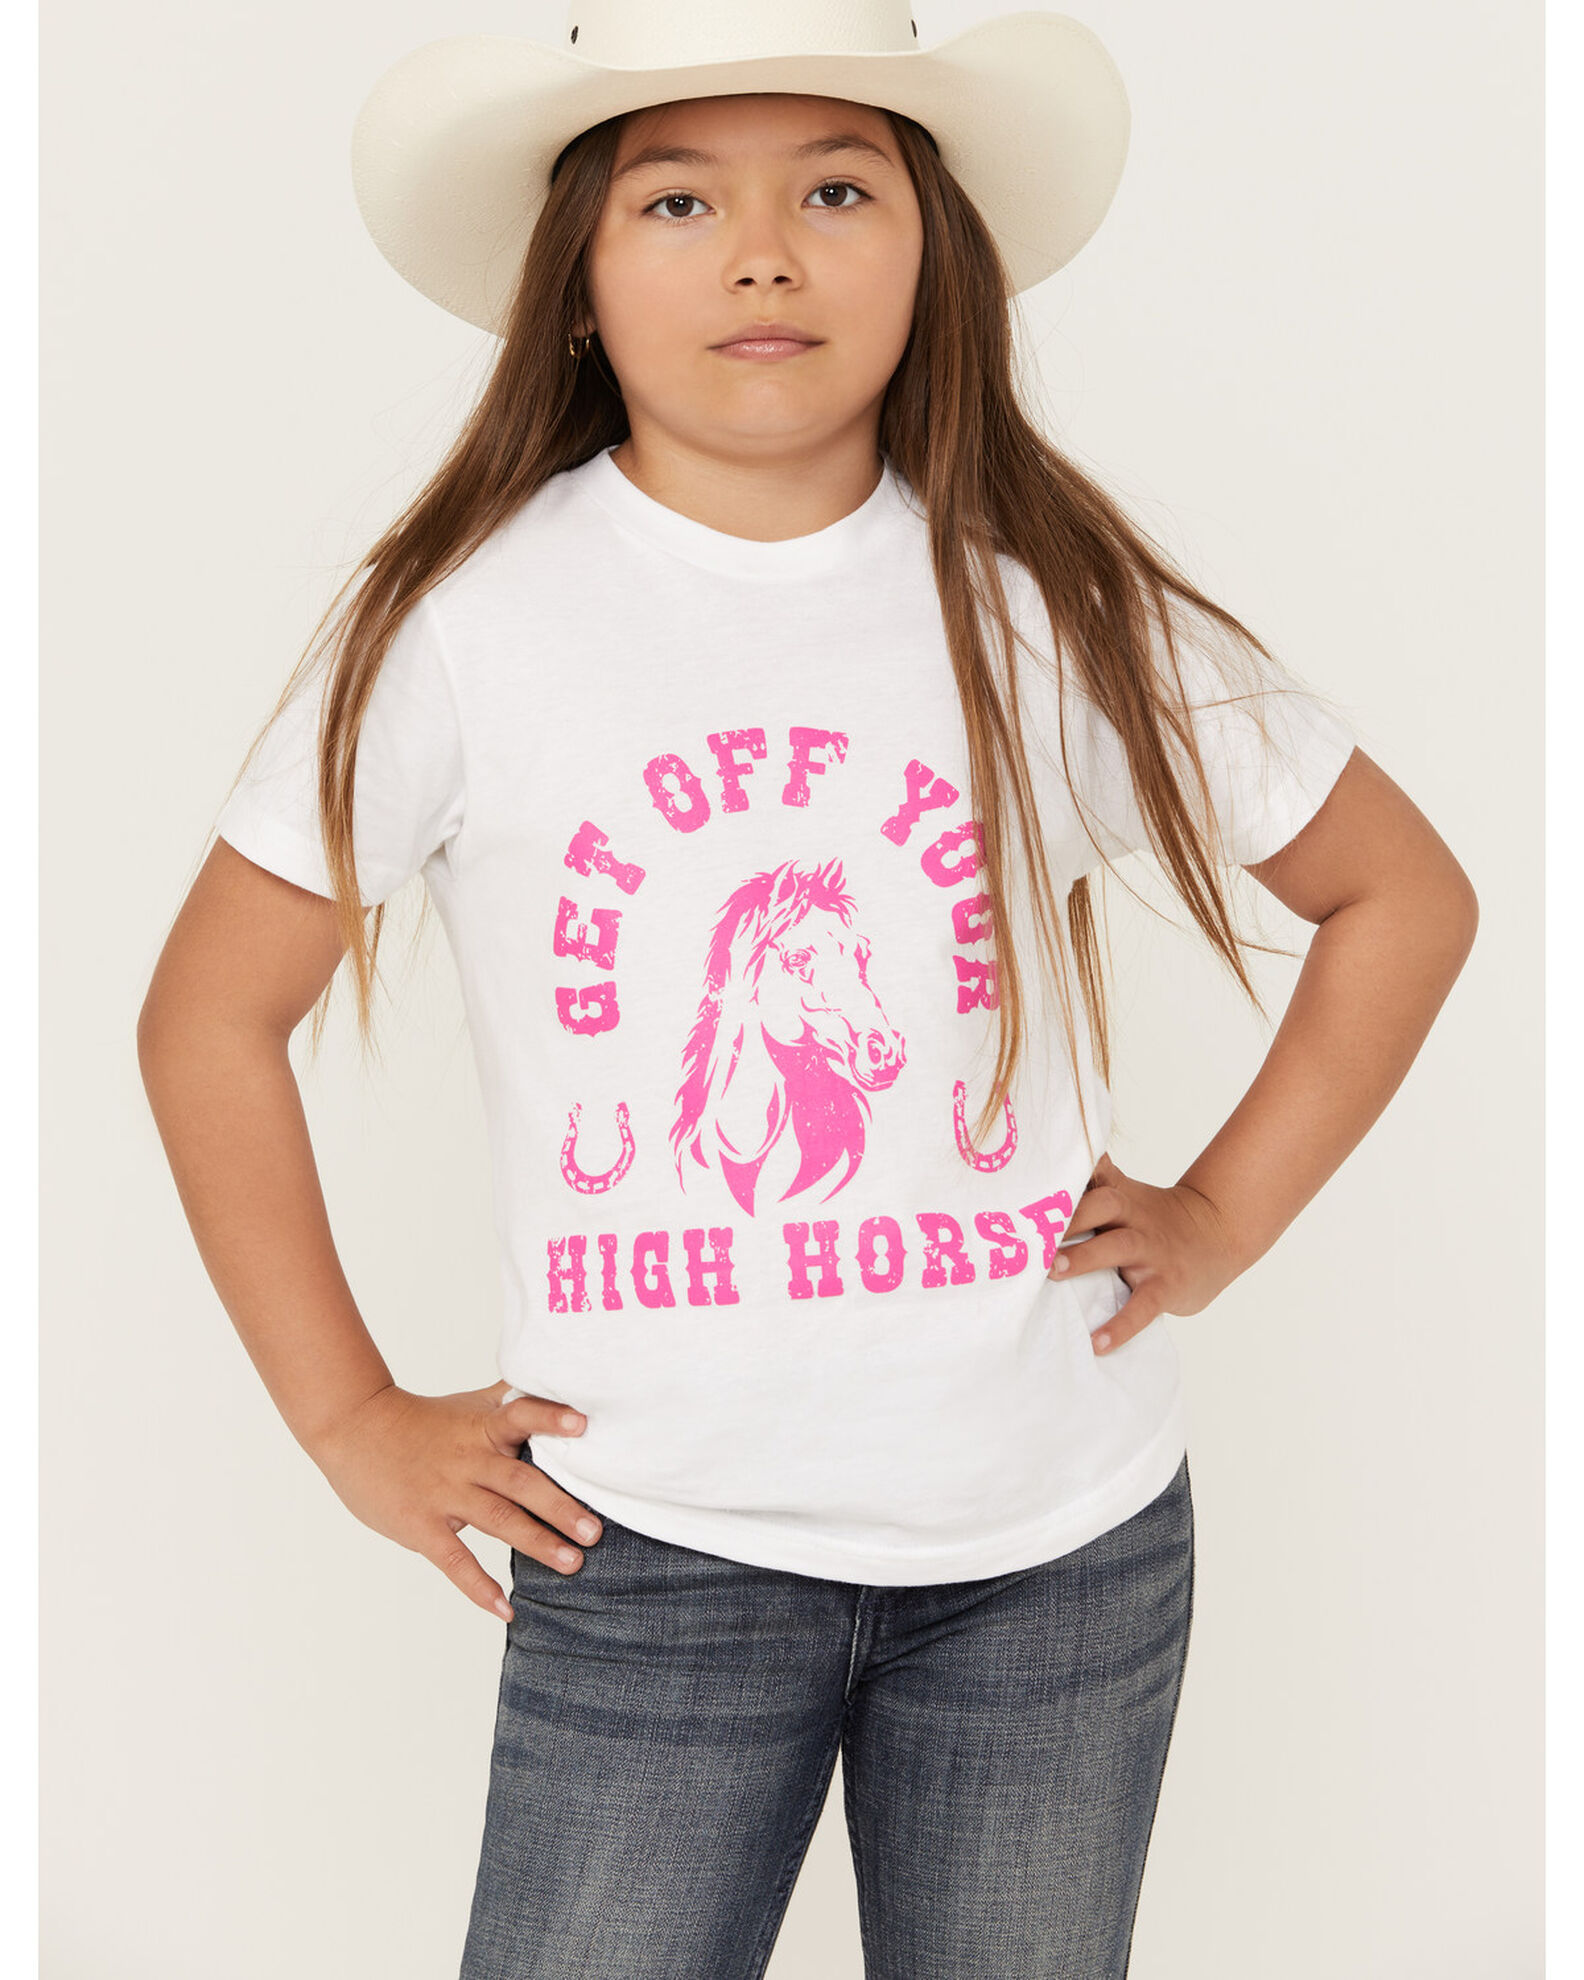 Ali Dee Girls' Get Off Your High Horse Short Sleeve Graphic Tee